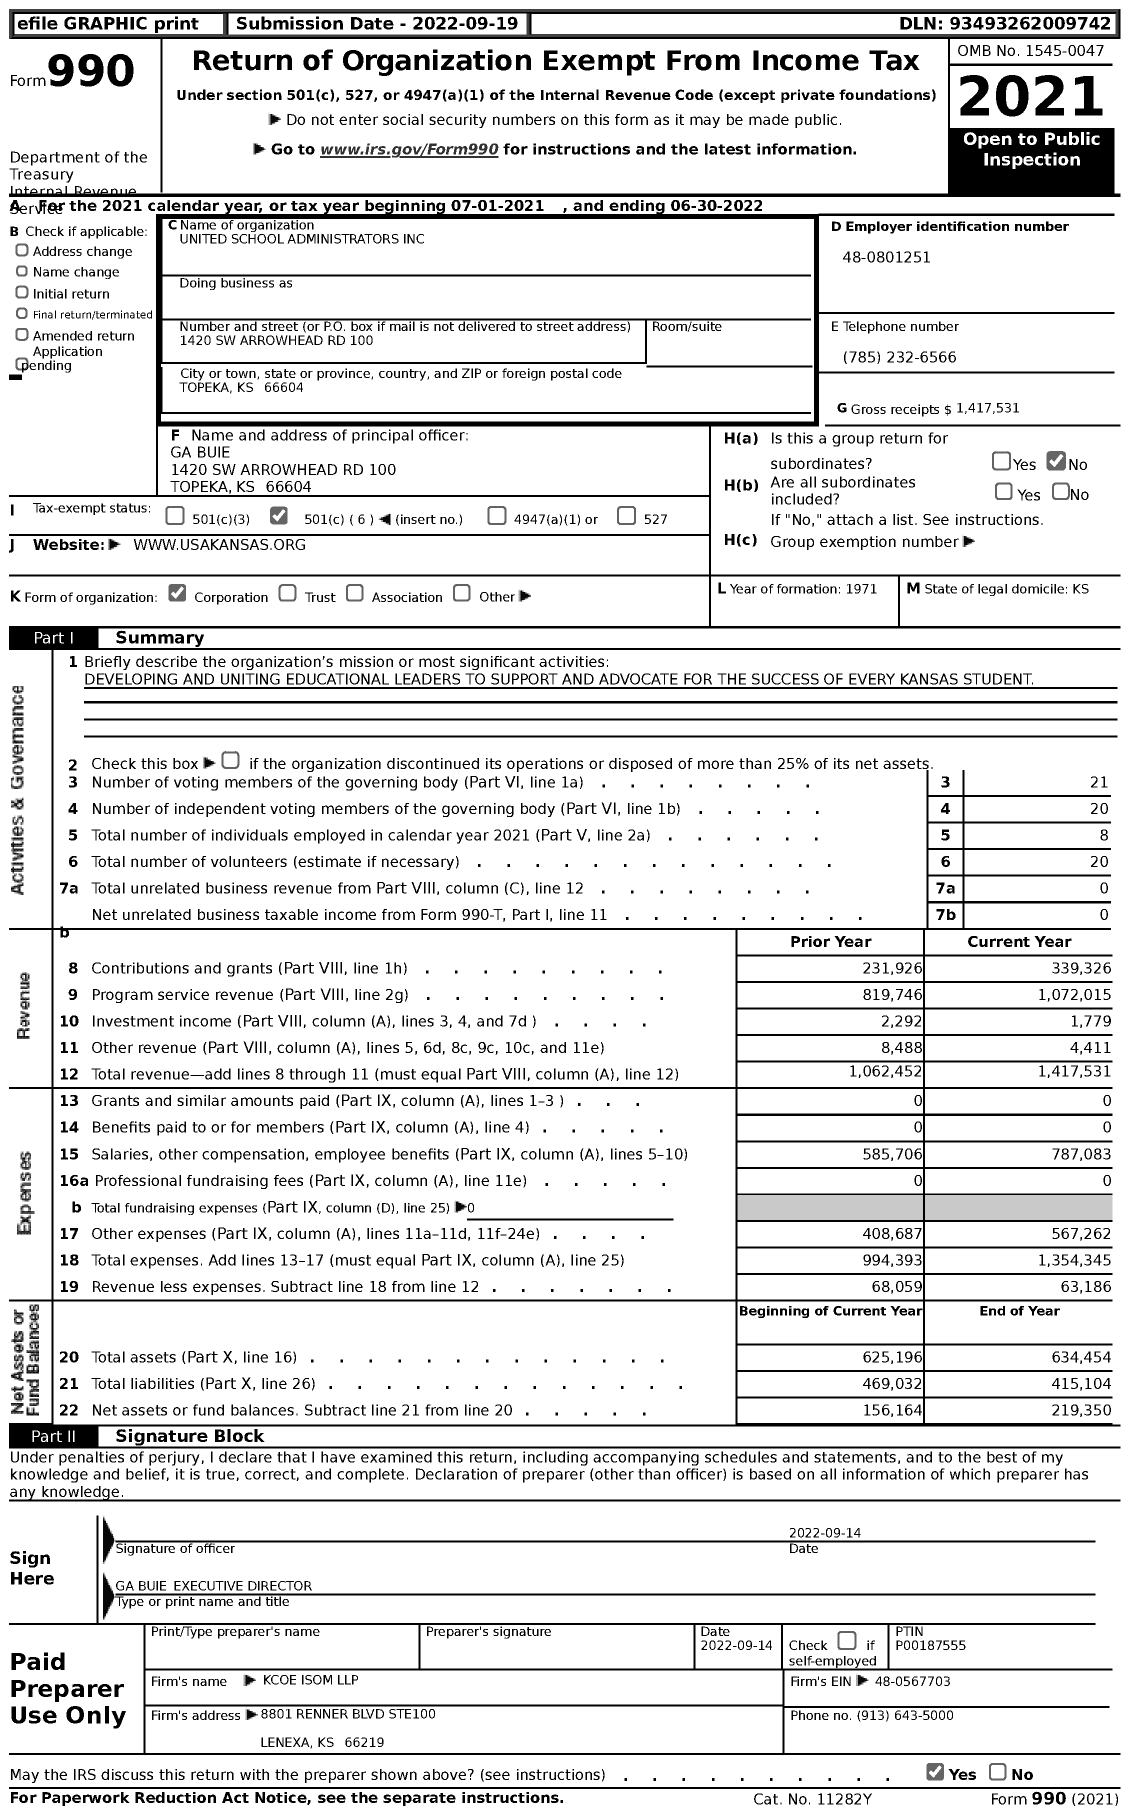 Image of first page of 2021 Form 990 for United School Administrators